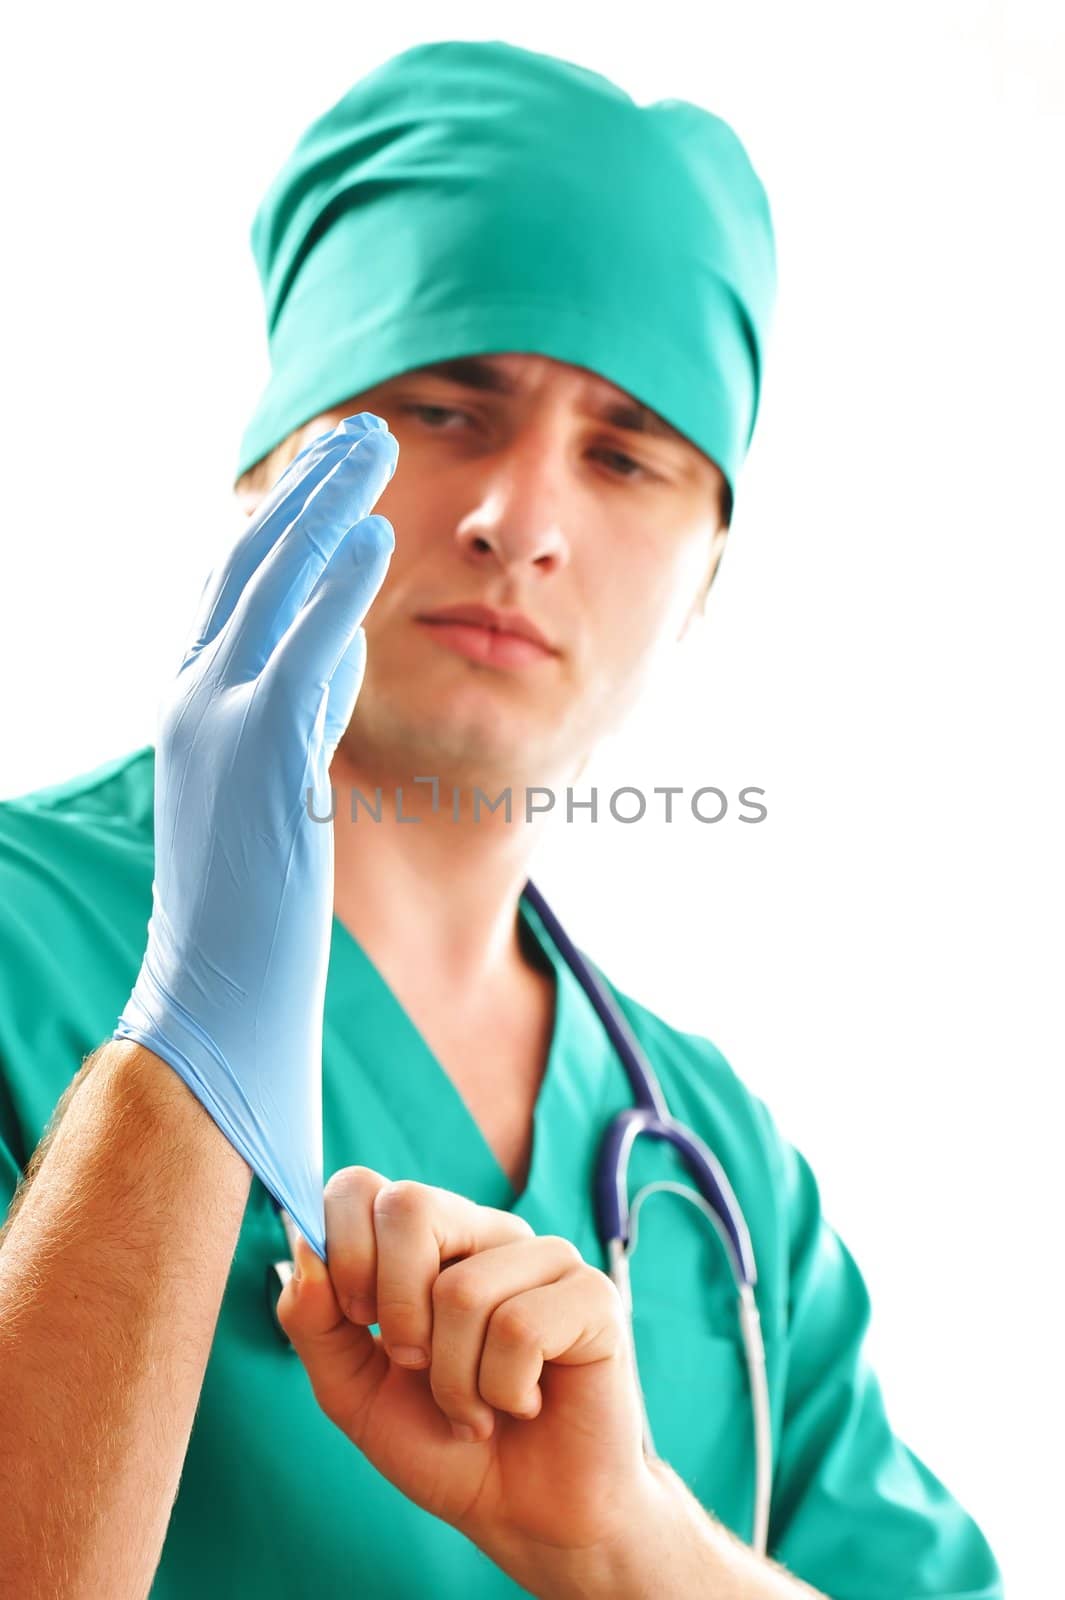 Doctor pulling on surgical glove